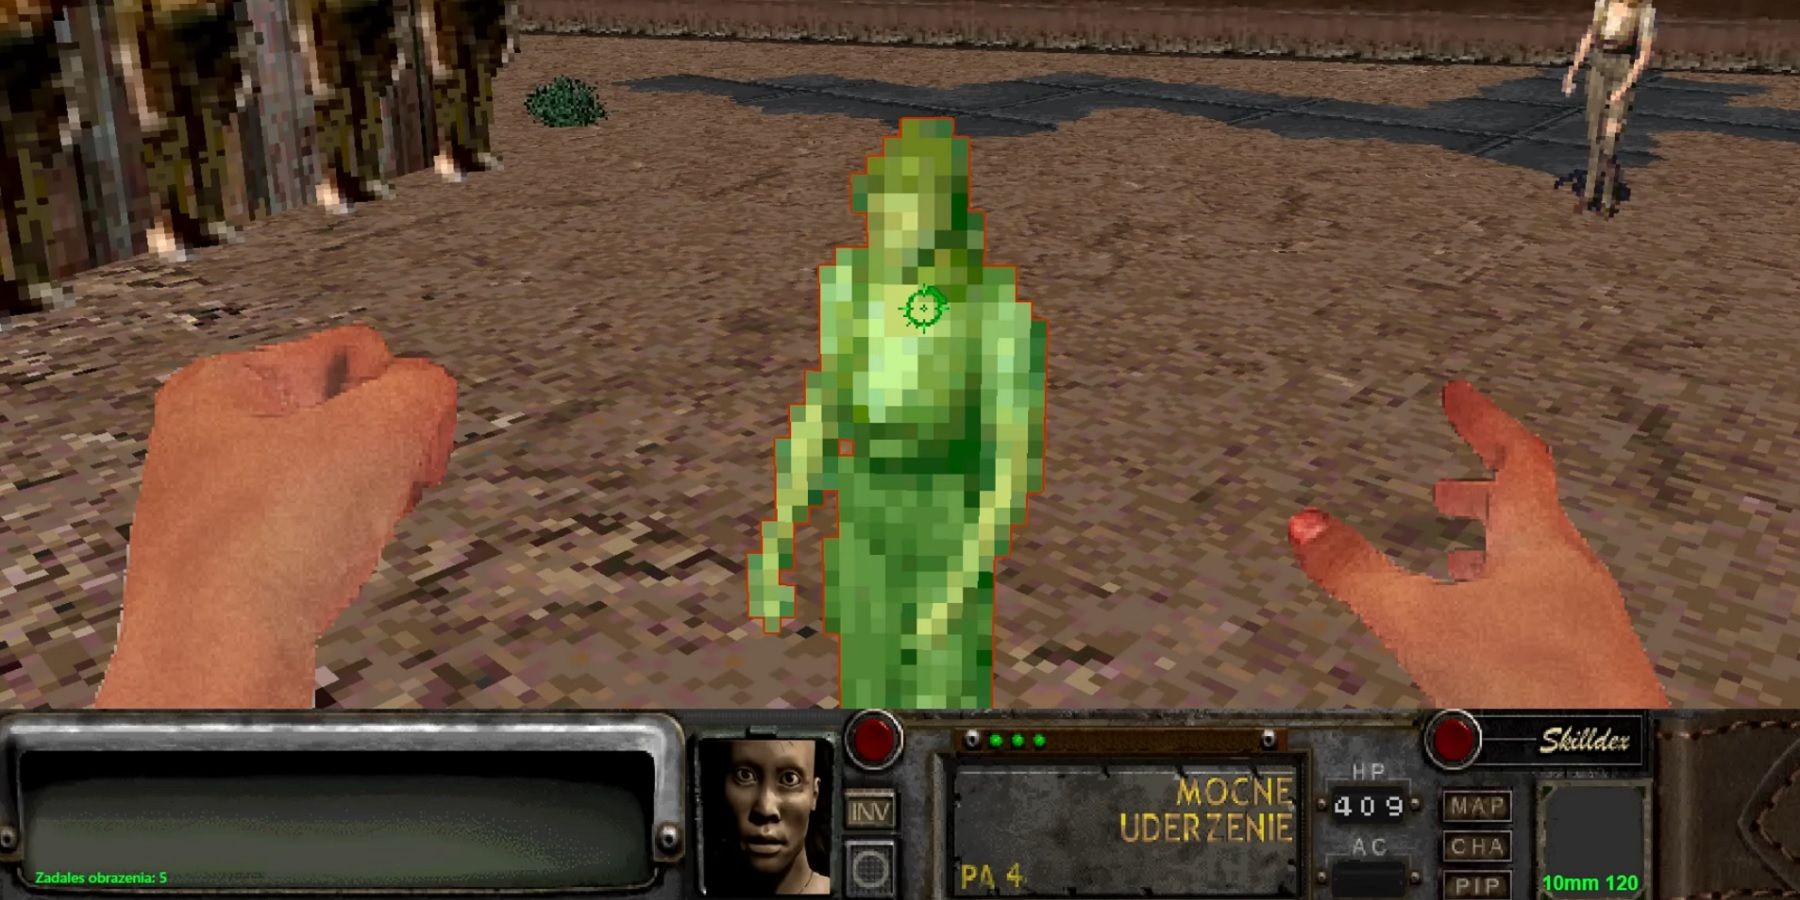 Image from a fan remake of Fallout 2 showing a first-person perspective.